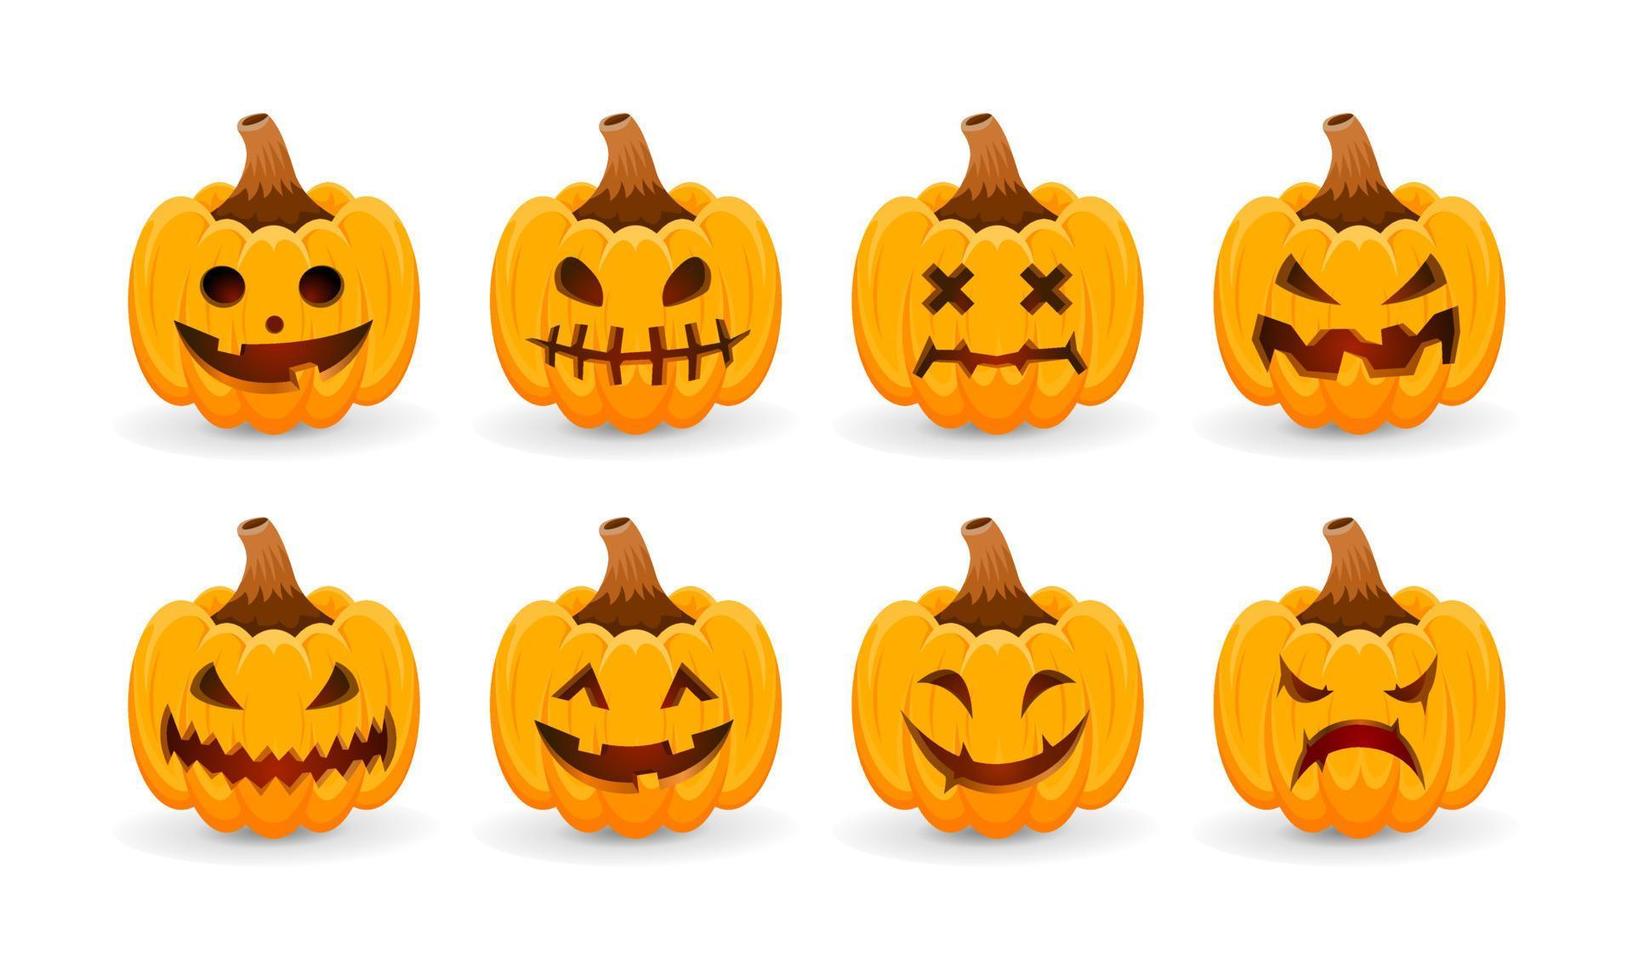 Many pumpkins show laughing, crying, happy and scary faces and are used on Halloween vector